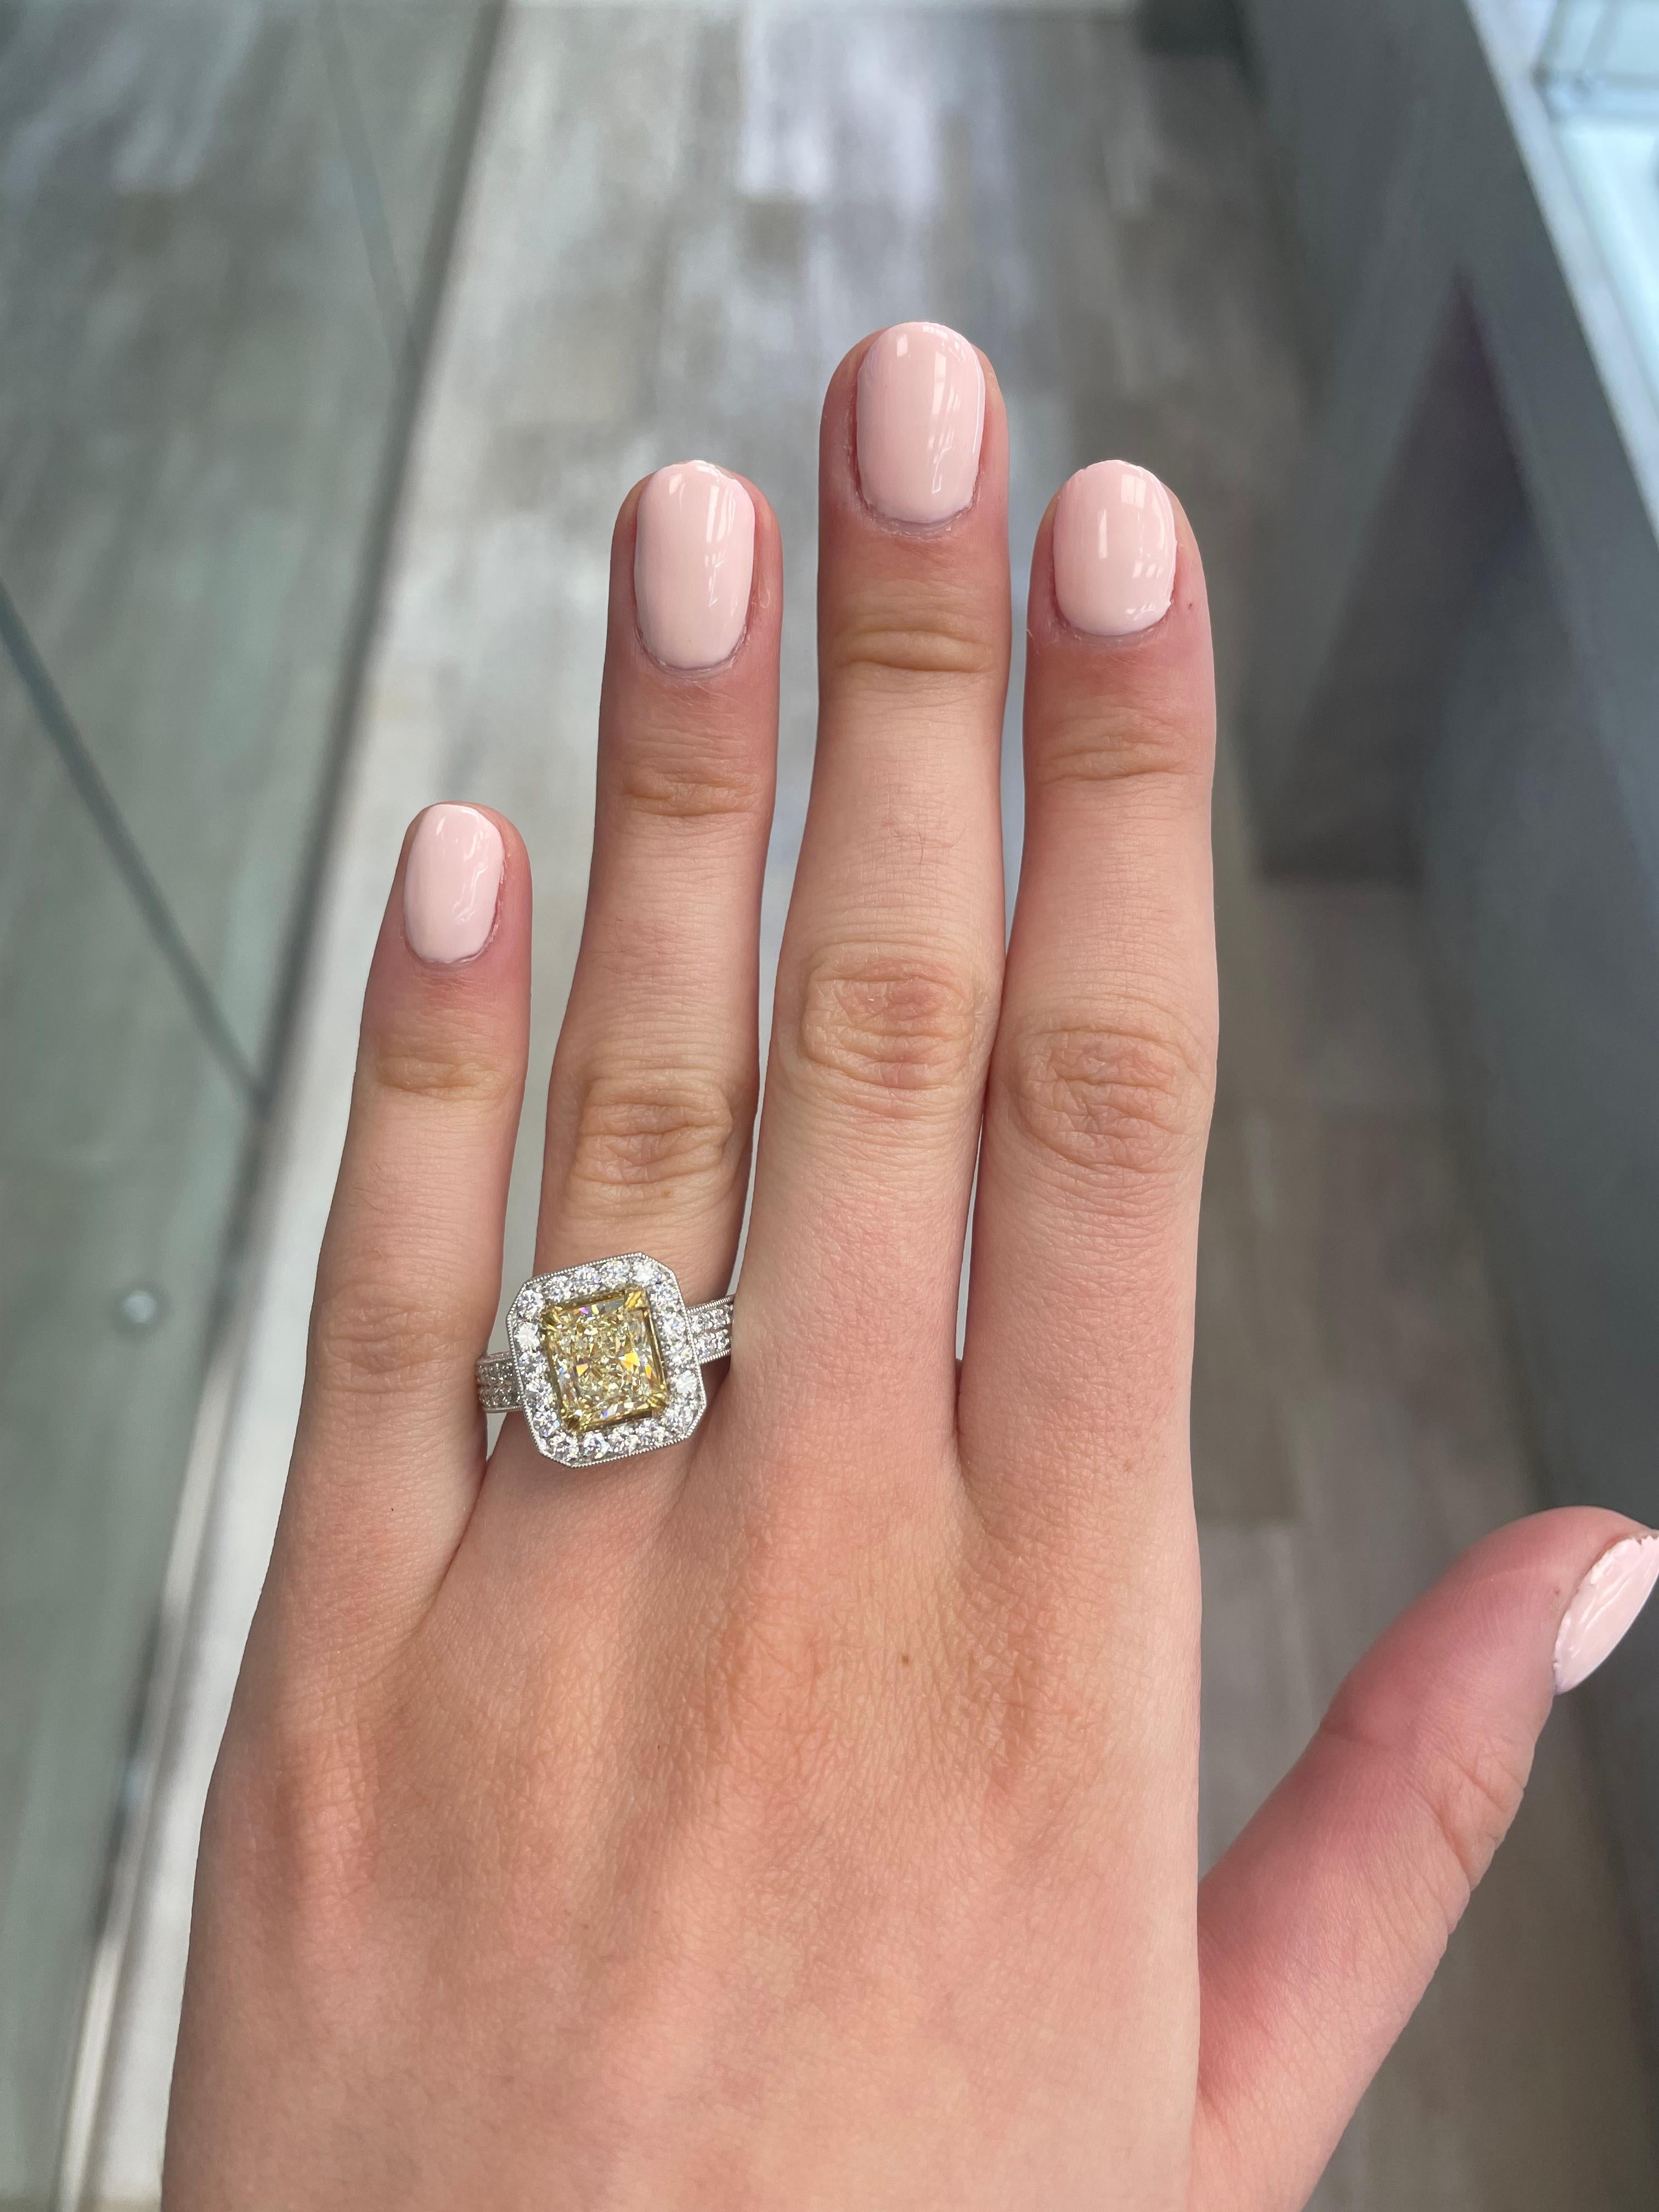 Stunning modern EGL certified yellow diamond with halo ring, two-tone 18k yellow and white gold. By Alexander Beverly Hills
3.49 carats total diamond weight.
2.08 carat radiant cut Fancy Yellow color and VVS2 clarity diamond, EGL graded.